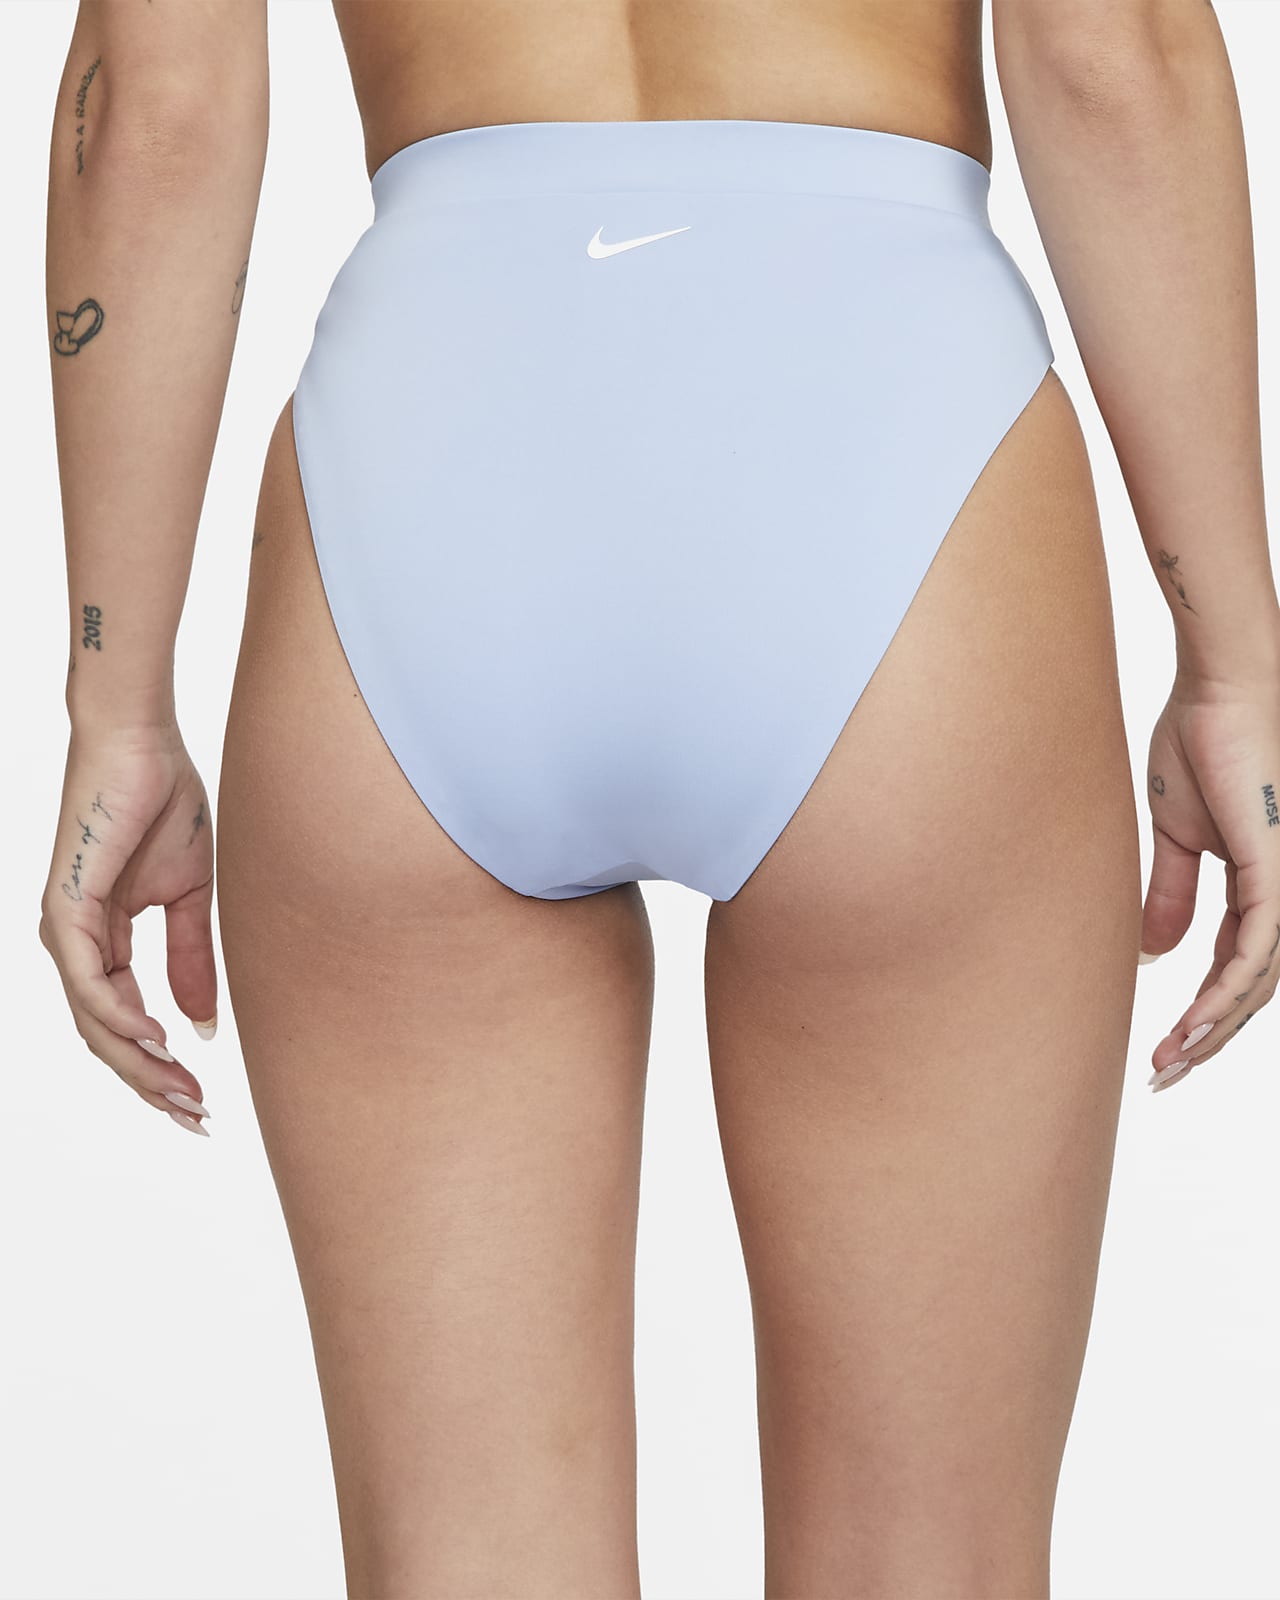 Nike Essential Women's High-Waisted Swimming Bottoms. Nike NL